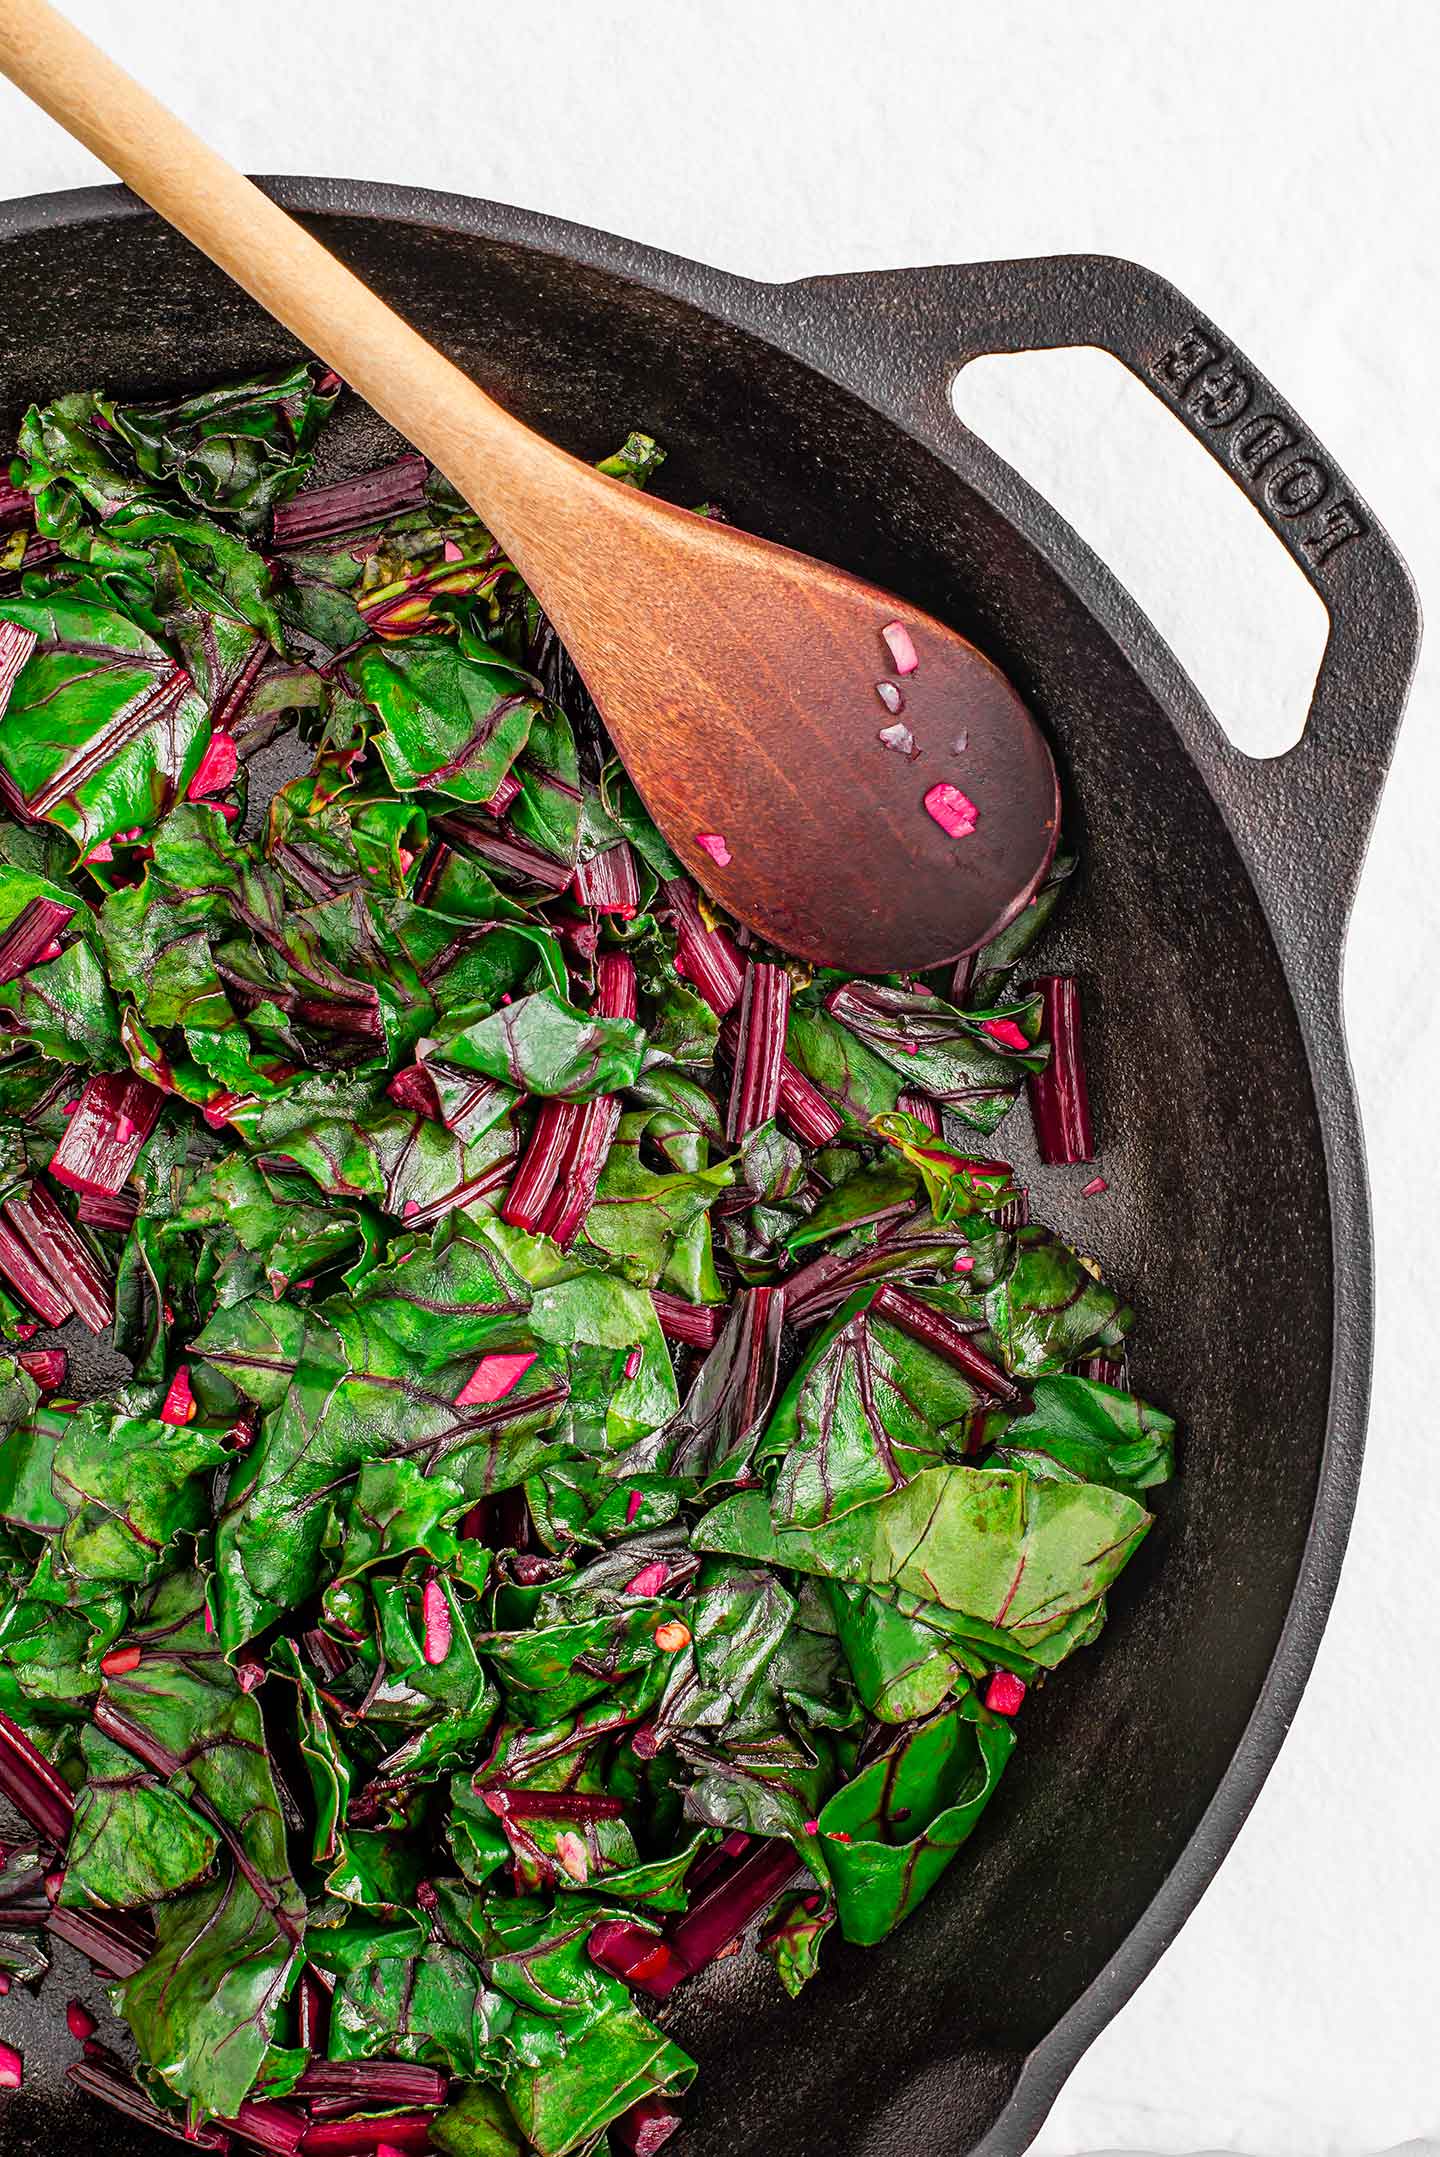 Top down view of cooked, sliced beet greens in a cast iron skillet. A wooden spoon rests on the side..